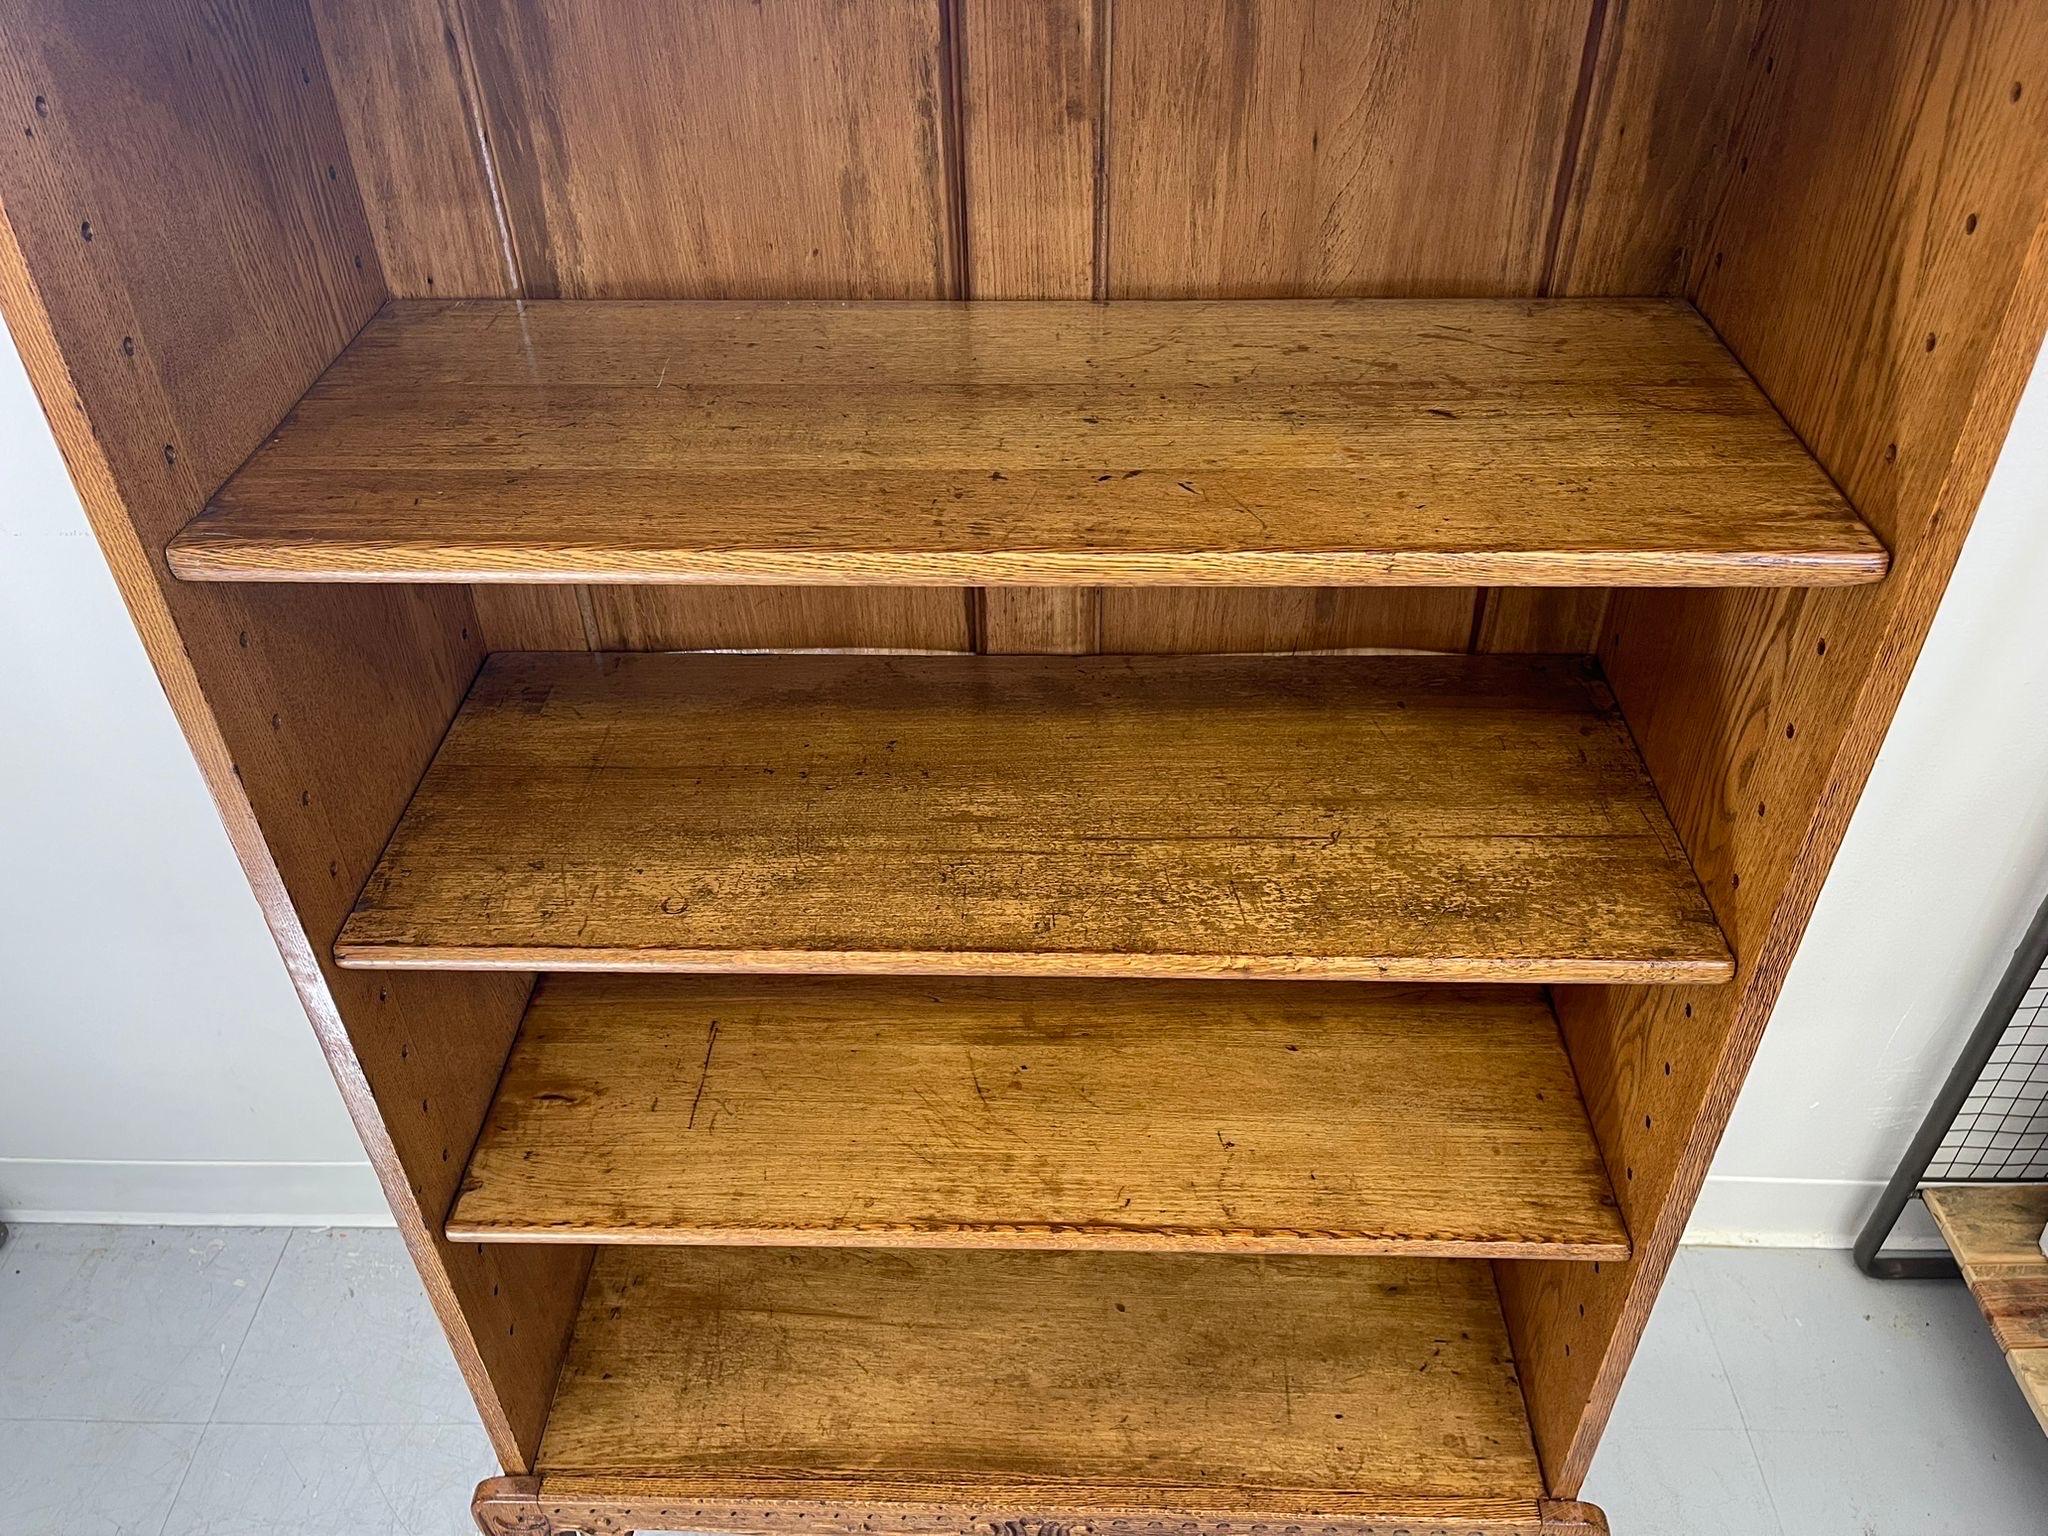 Vintage Bookshelf With Carved Wood Accents . 1